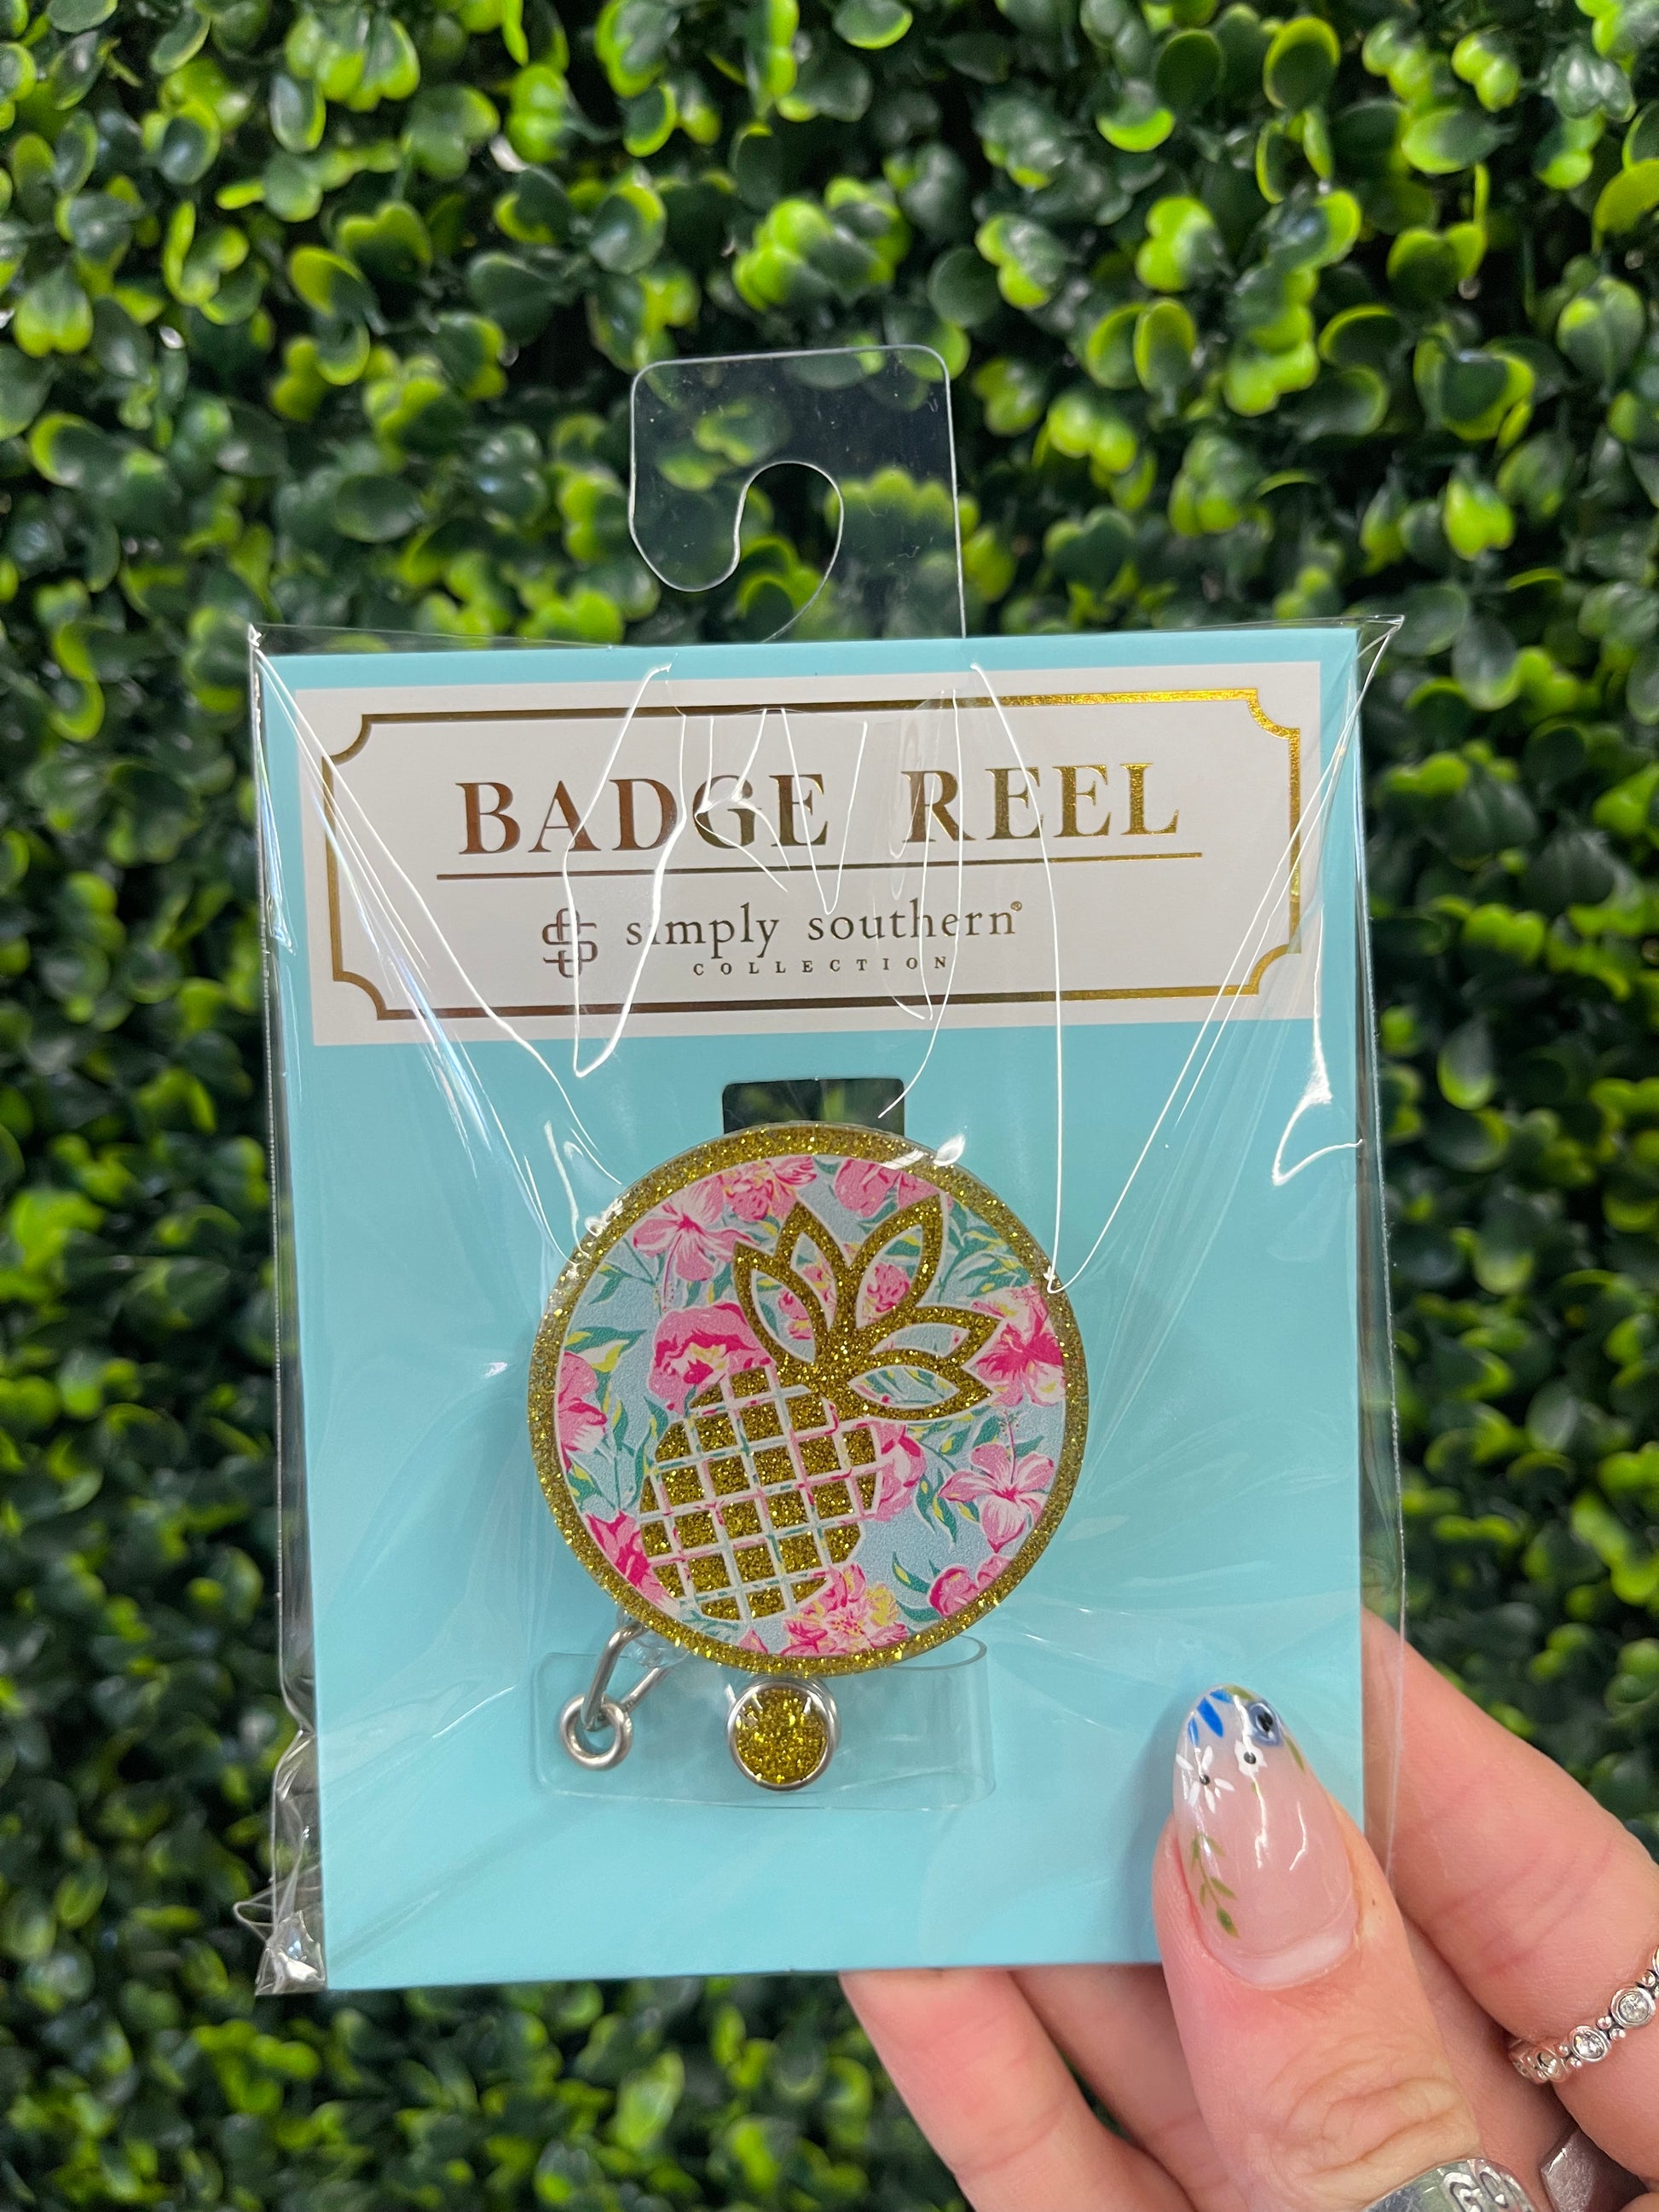 Dixie Made - New Item! Simply Southern badge reels are $7